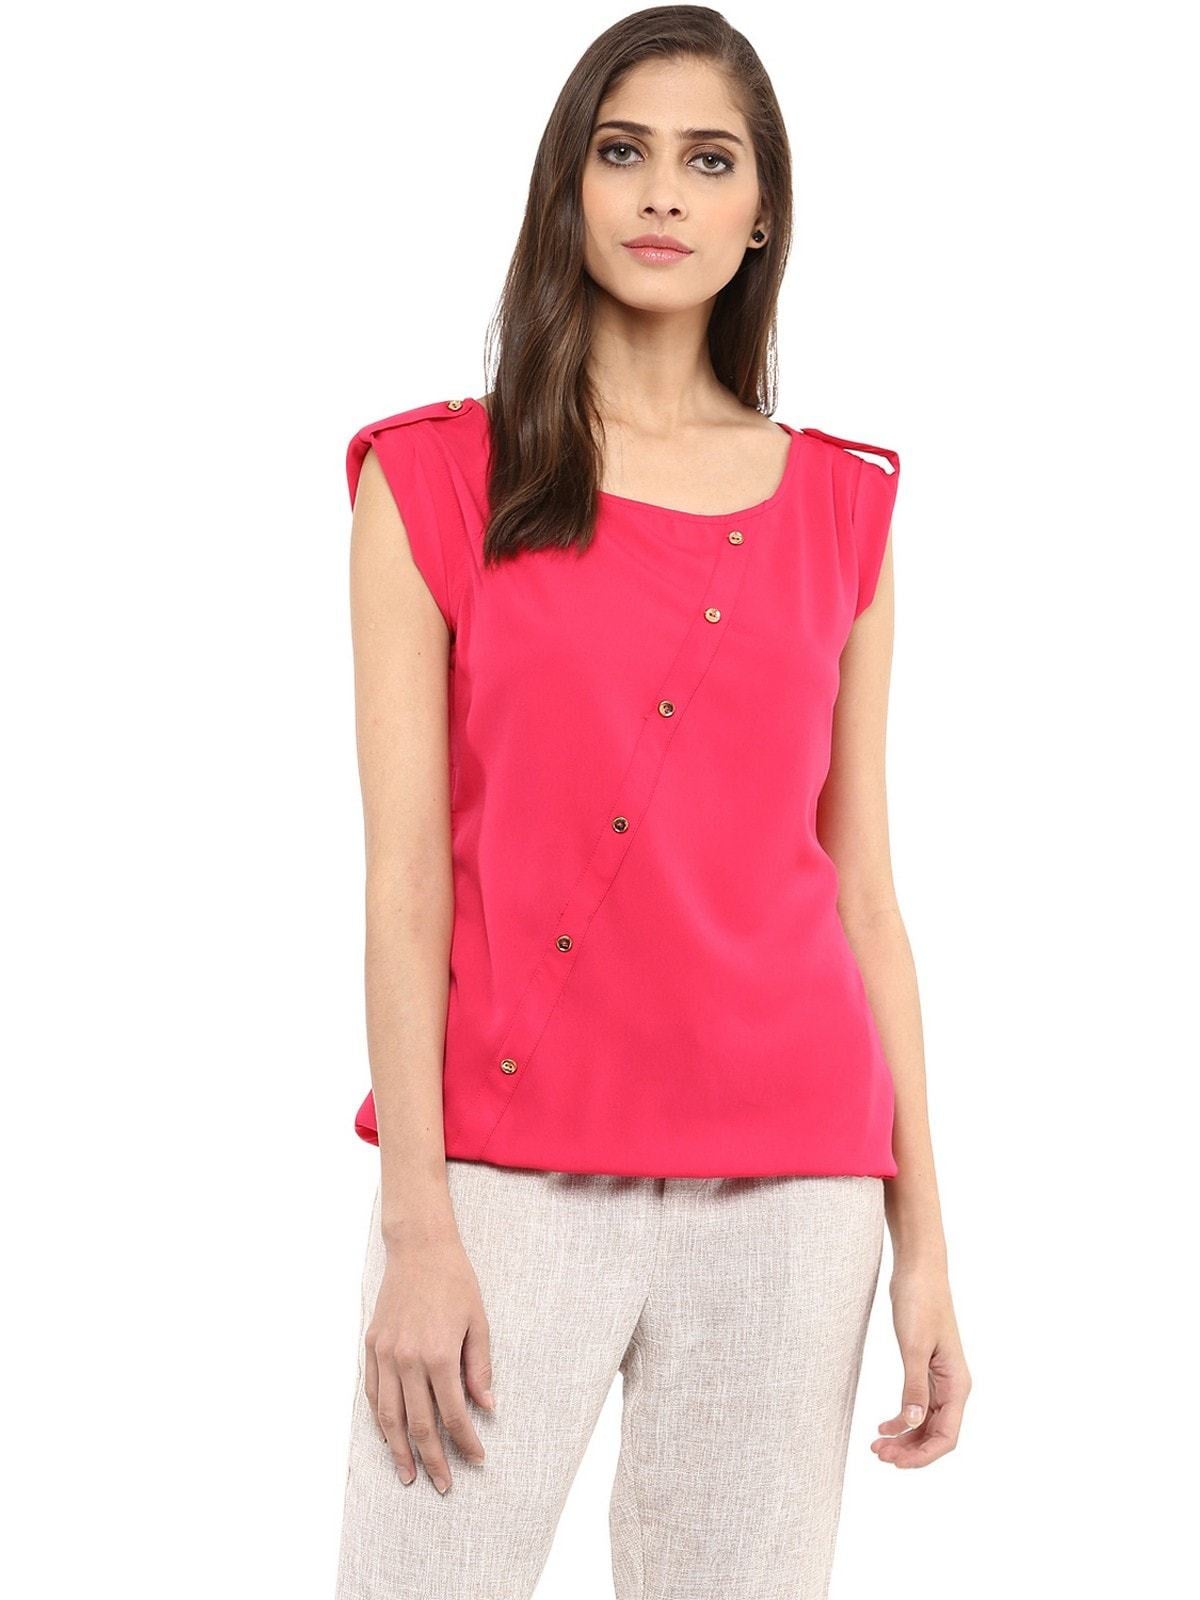 Women's Pink Top With Fake Shoulder-Tab - Pannkh